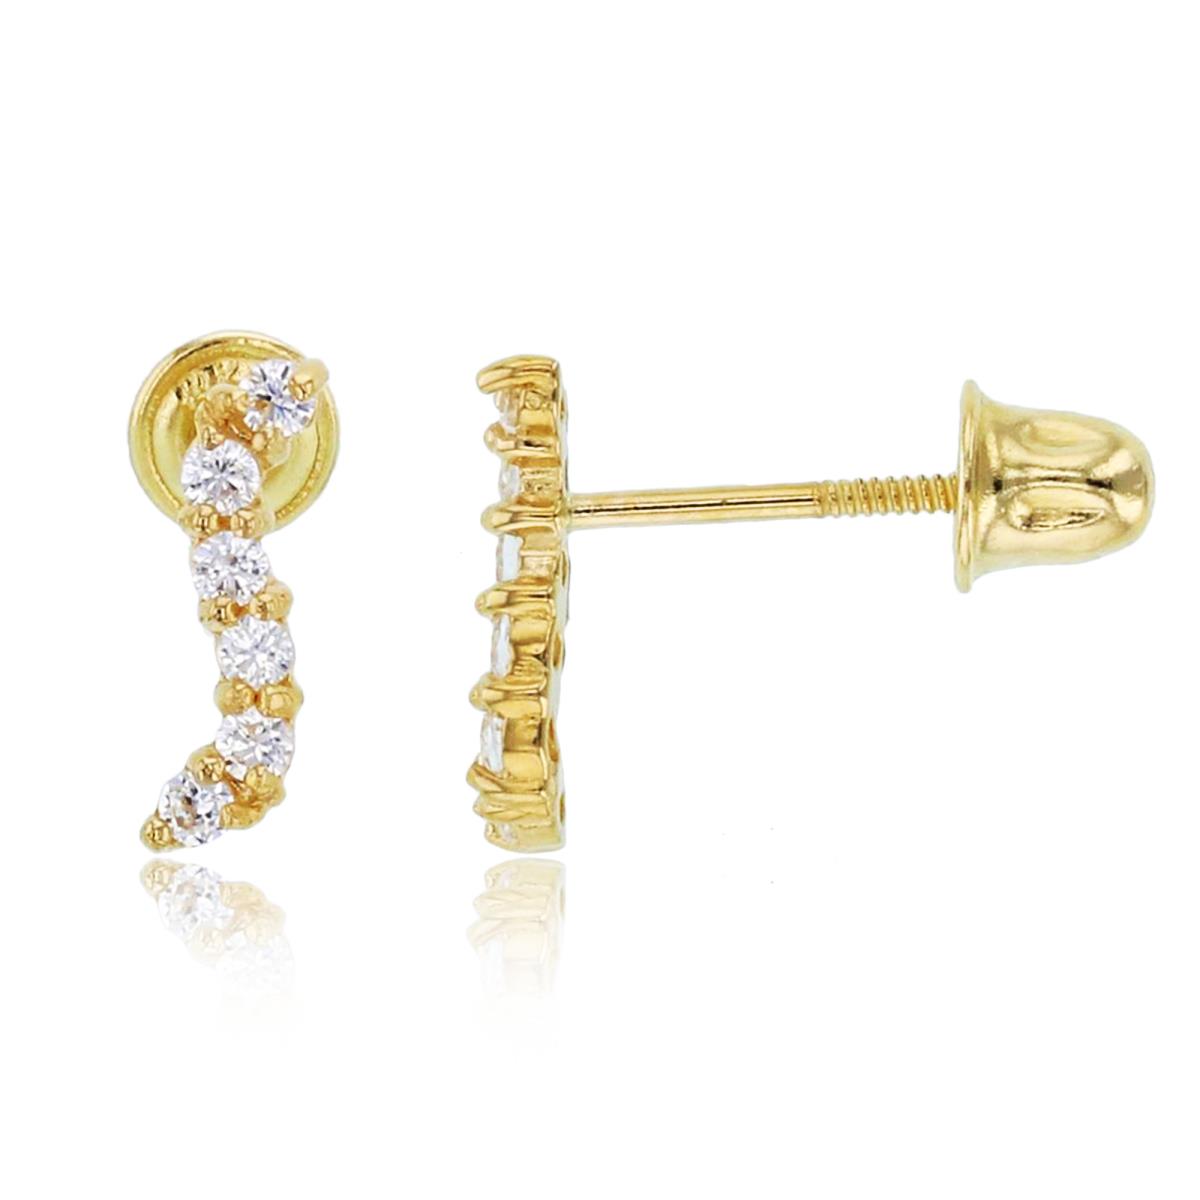 14K Yellow Gold Paved Curved Screwback Stud Earring